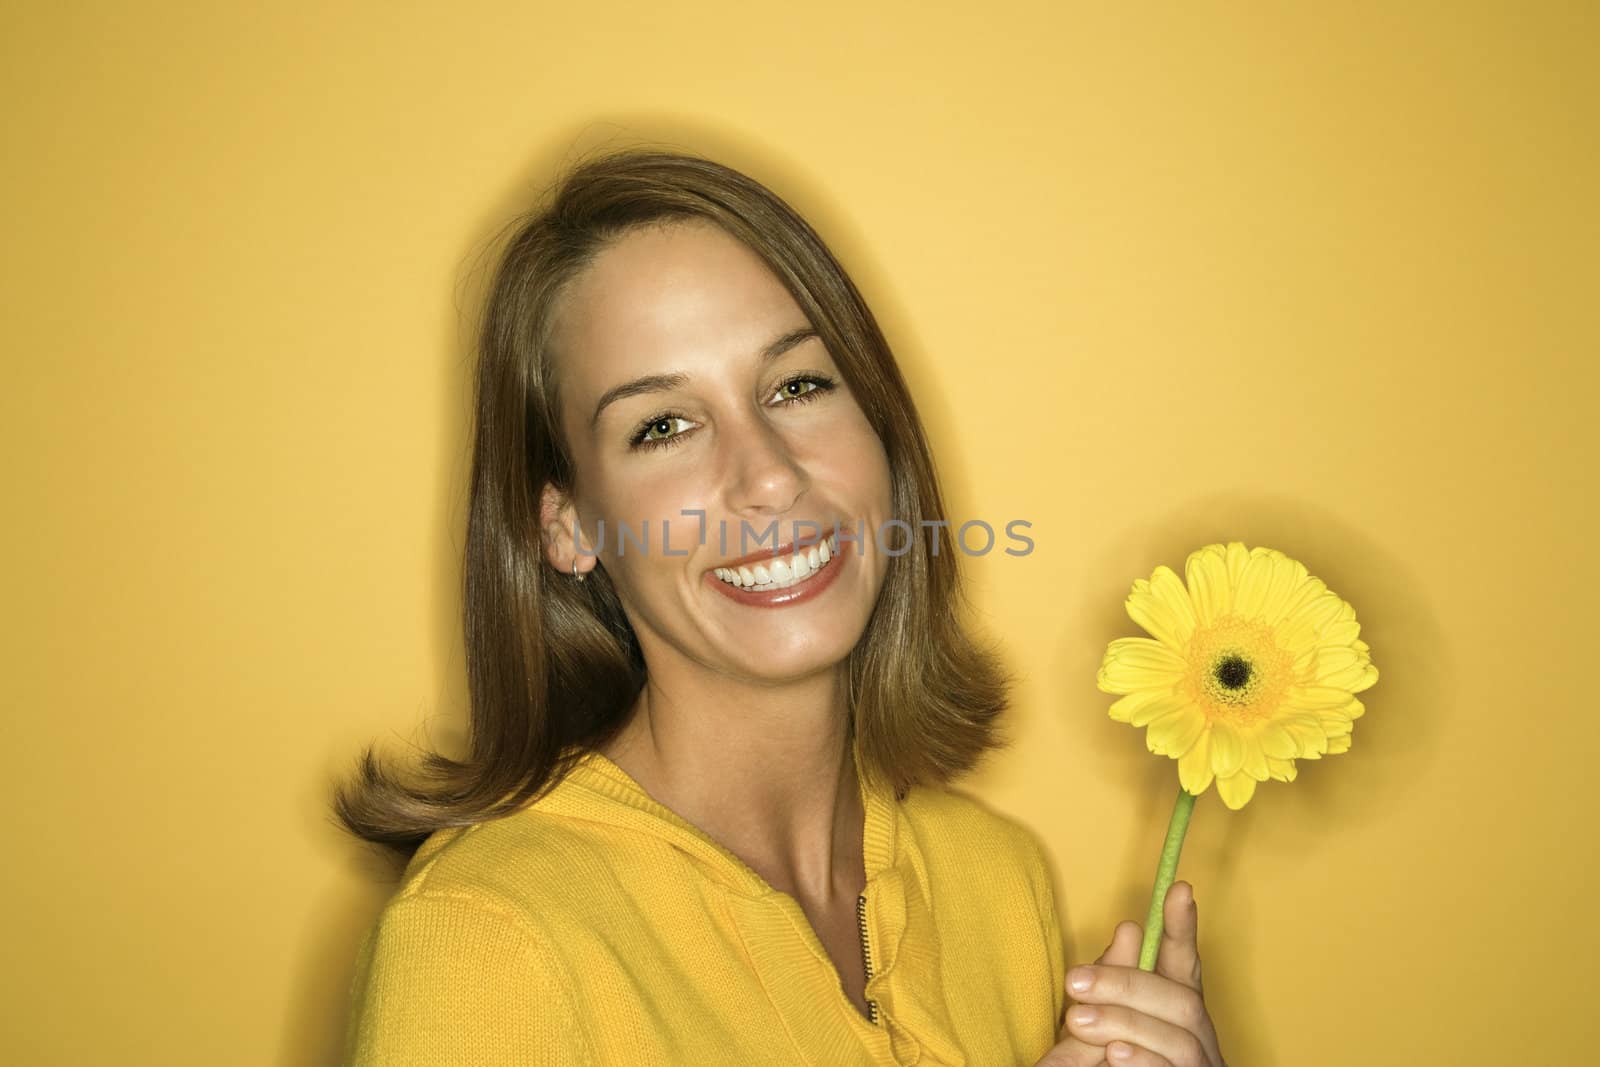 Portrait of smiling young adult Caucasian woman on yellow background holding flower.